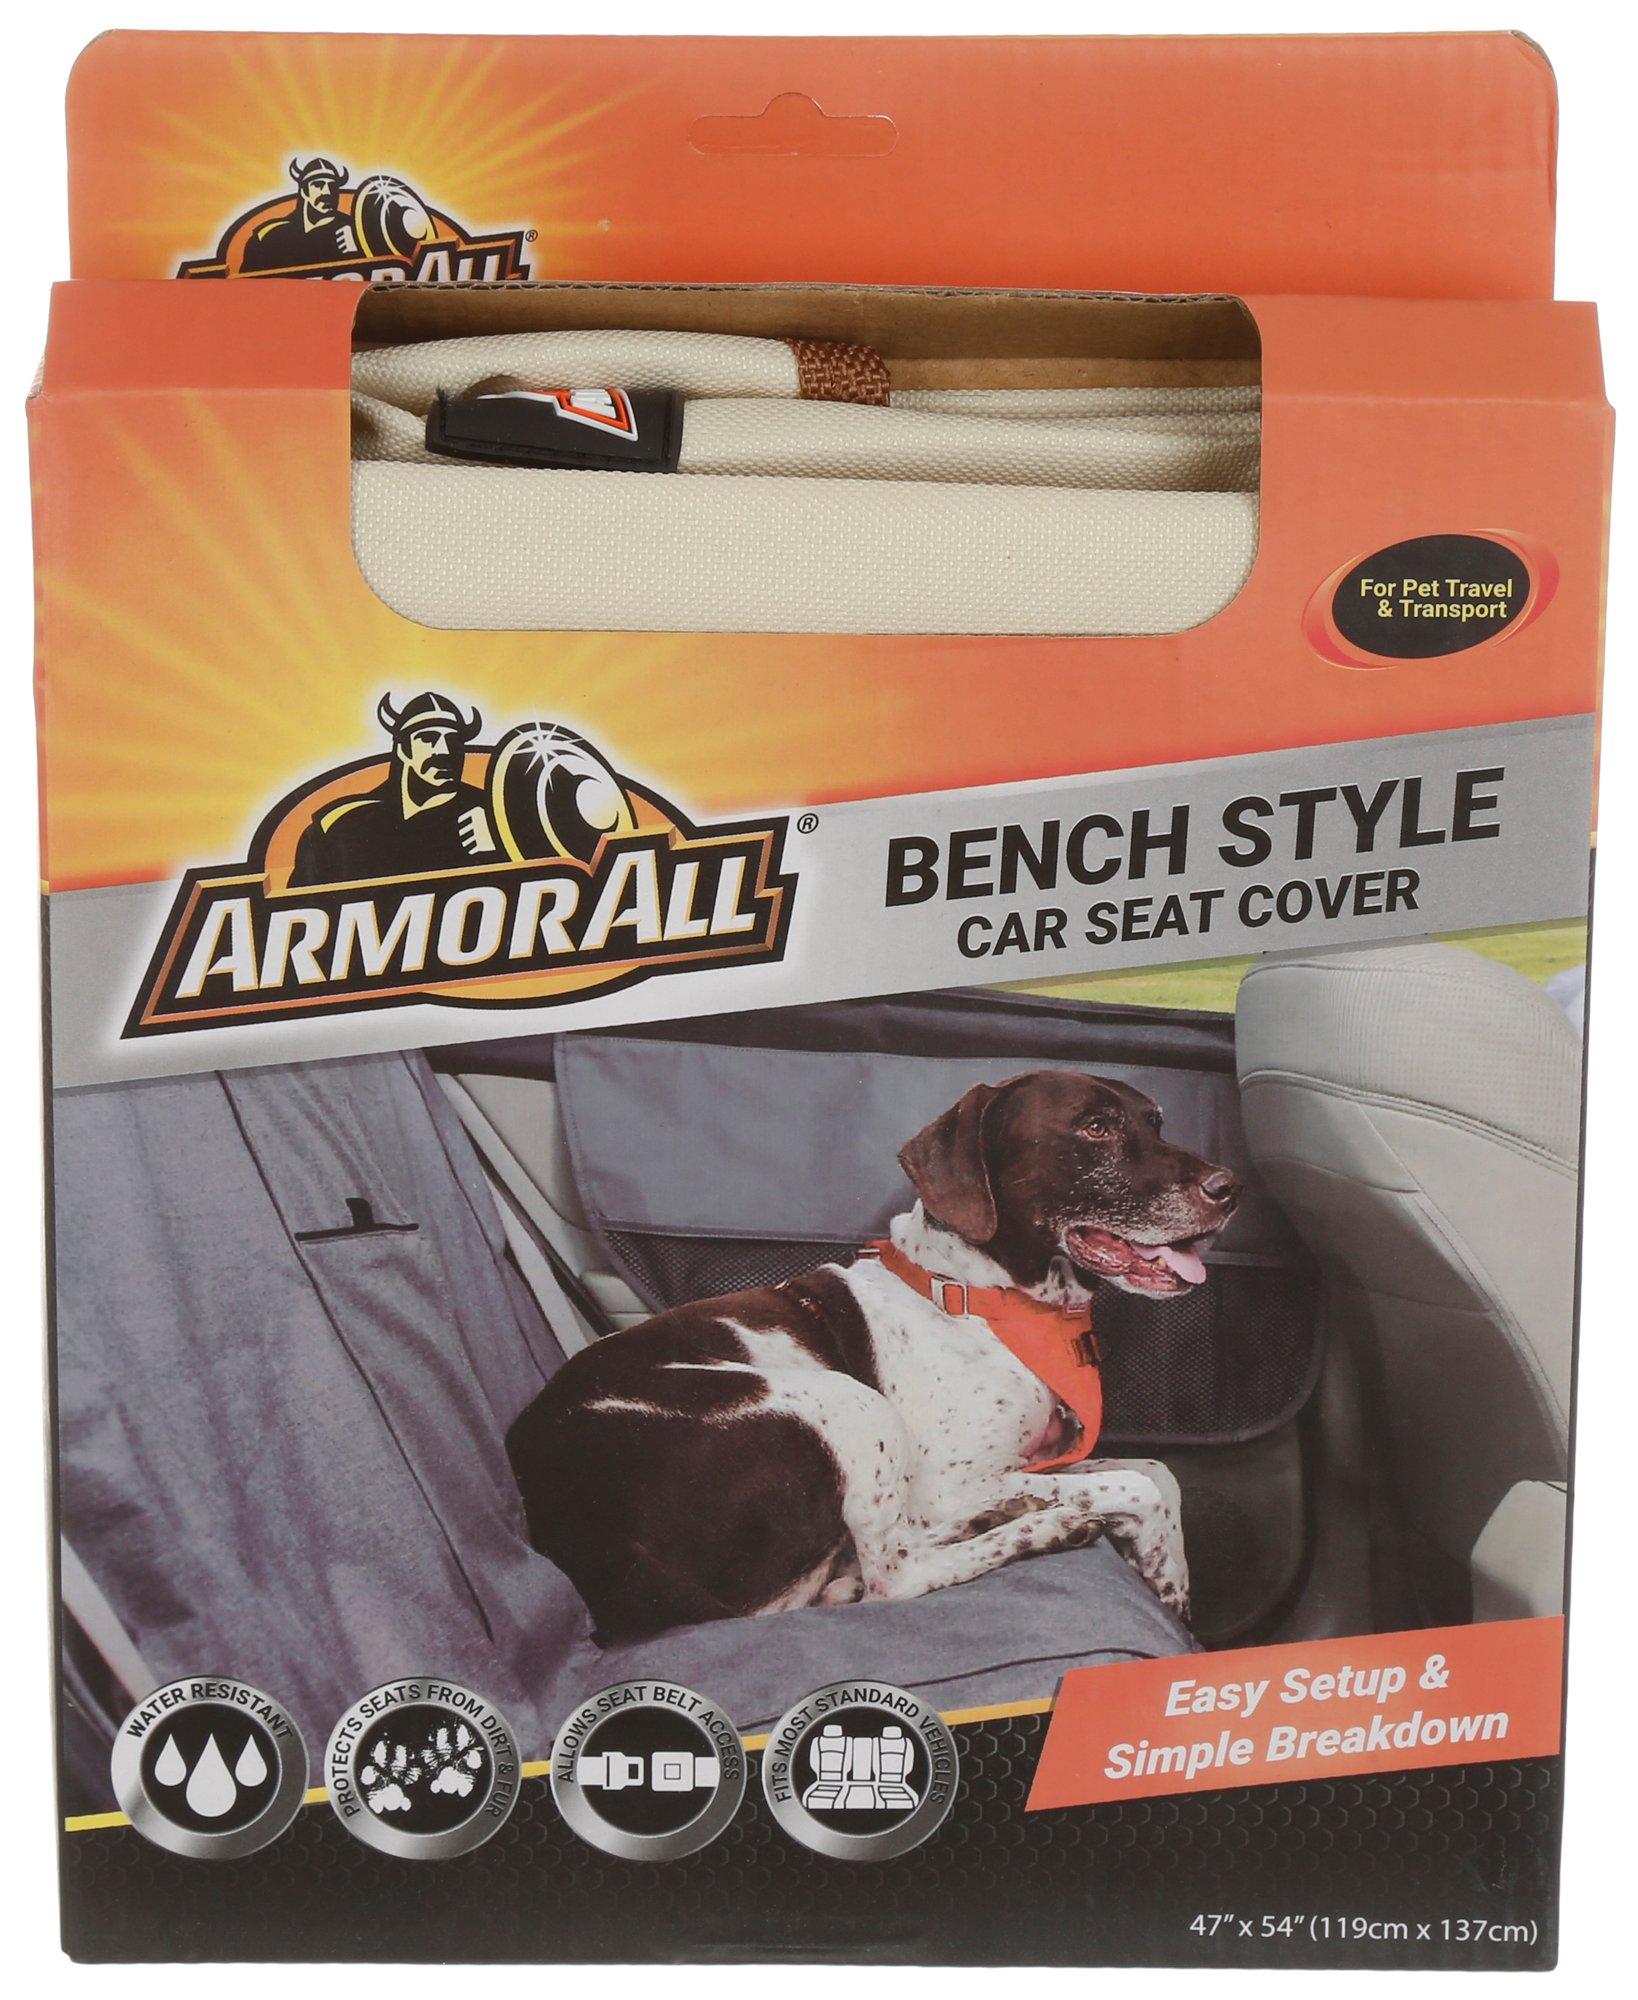 Bench Style Car Seat Cover